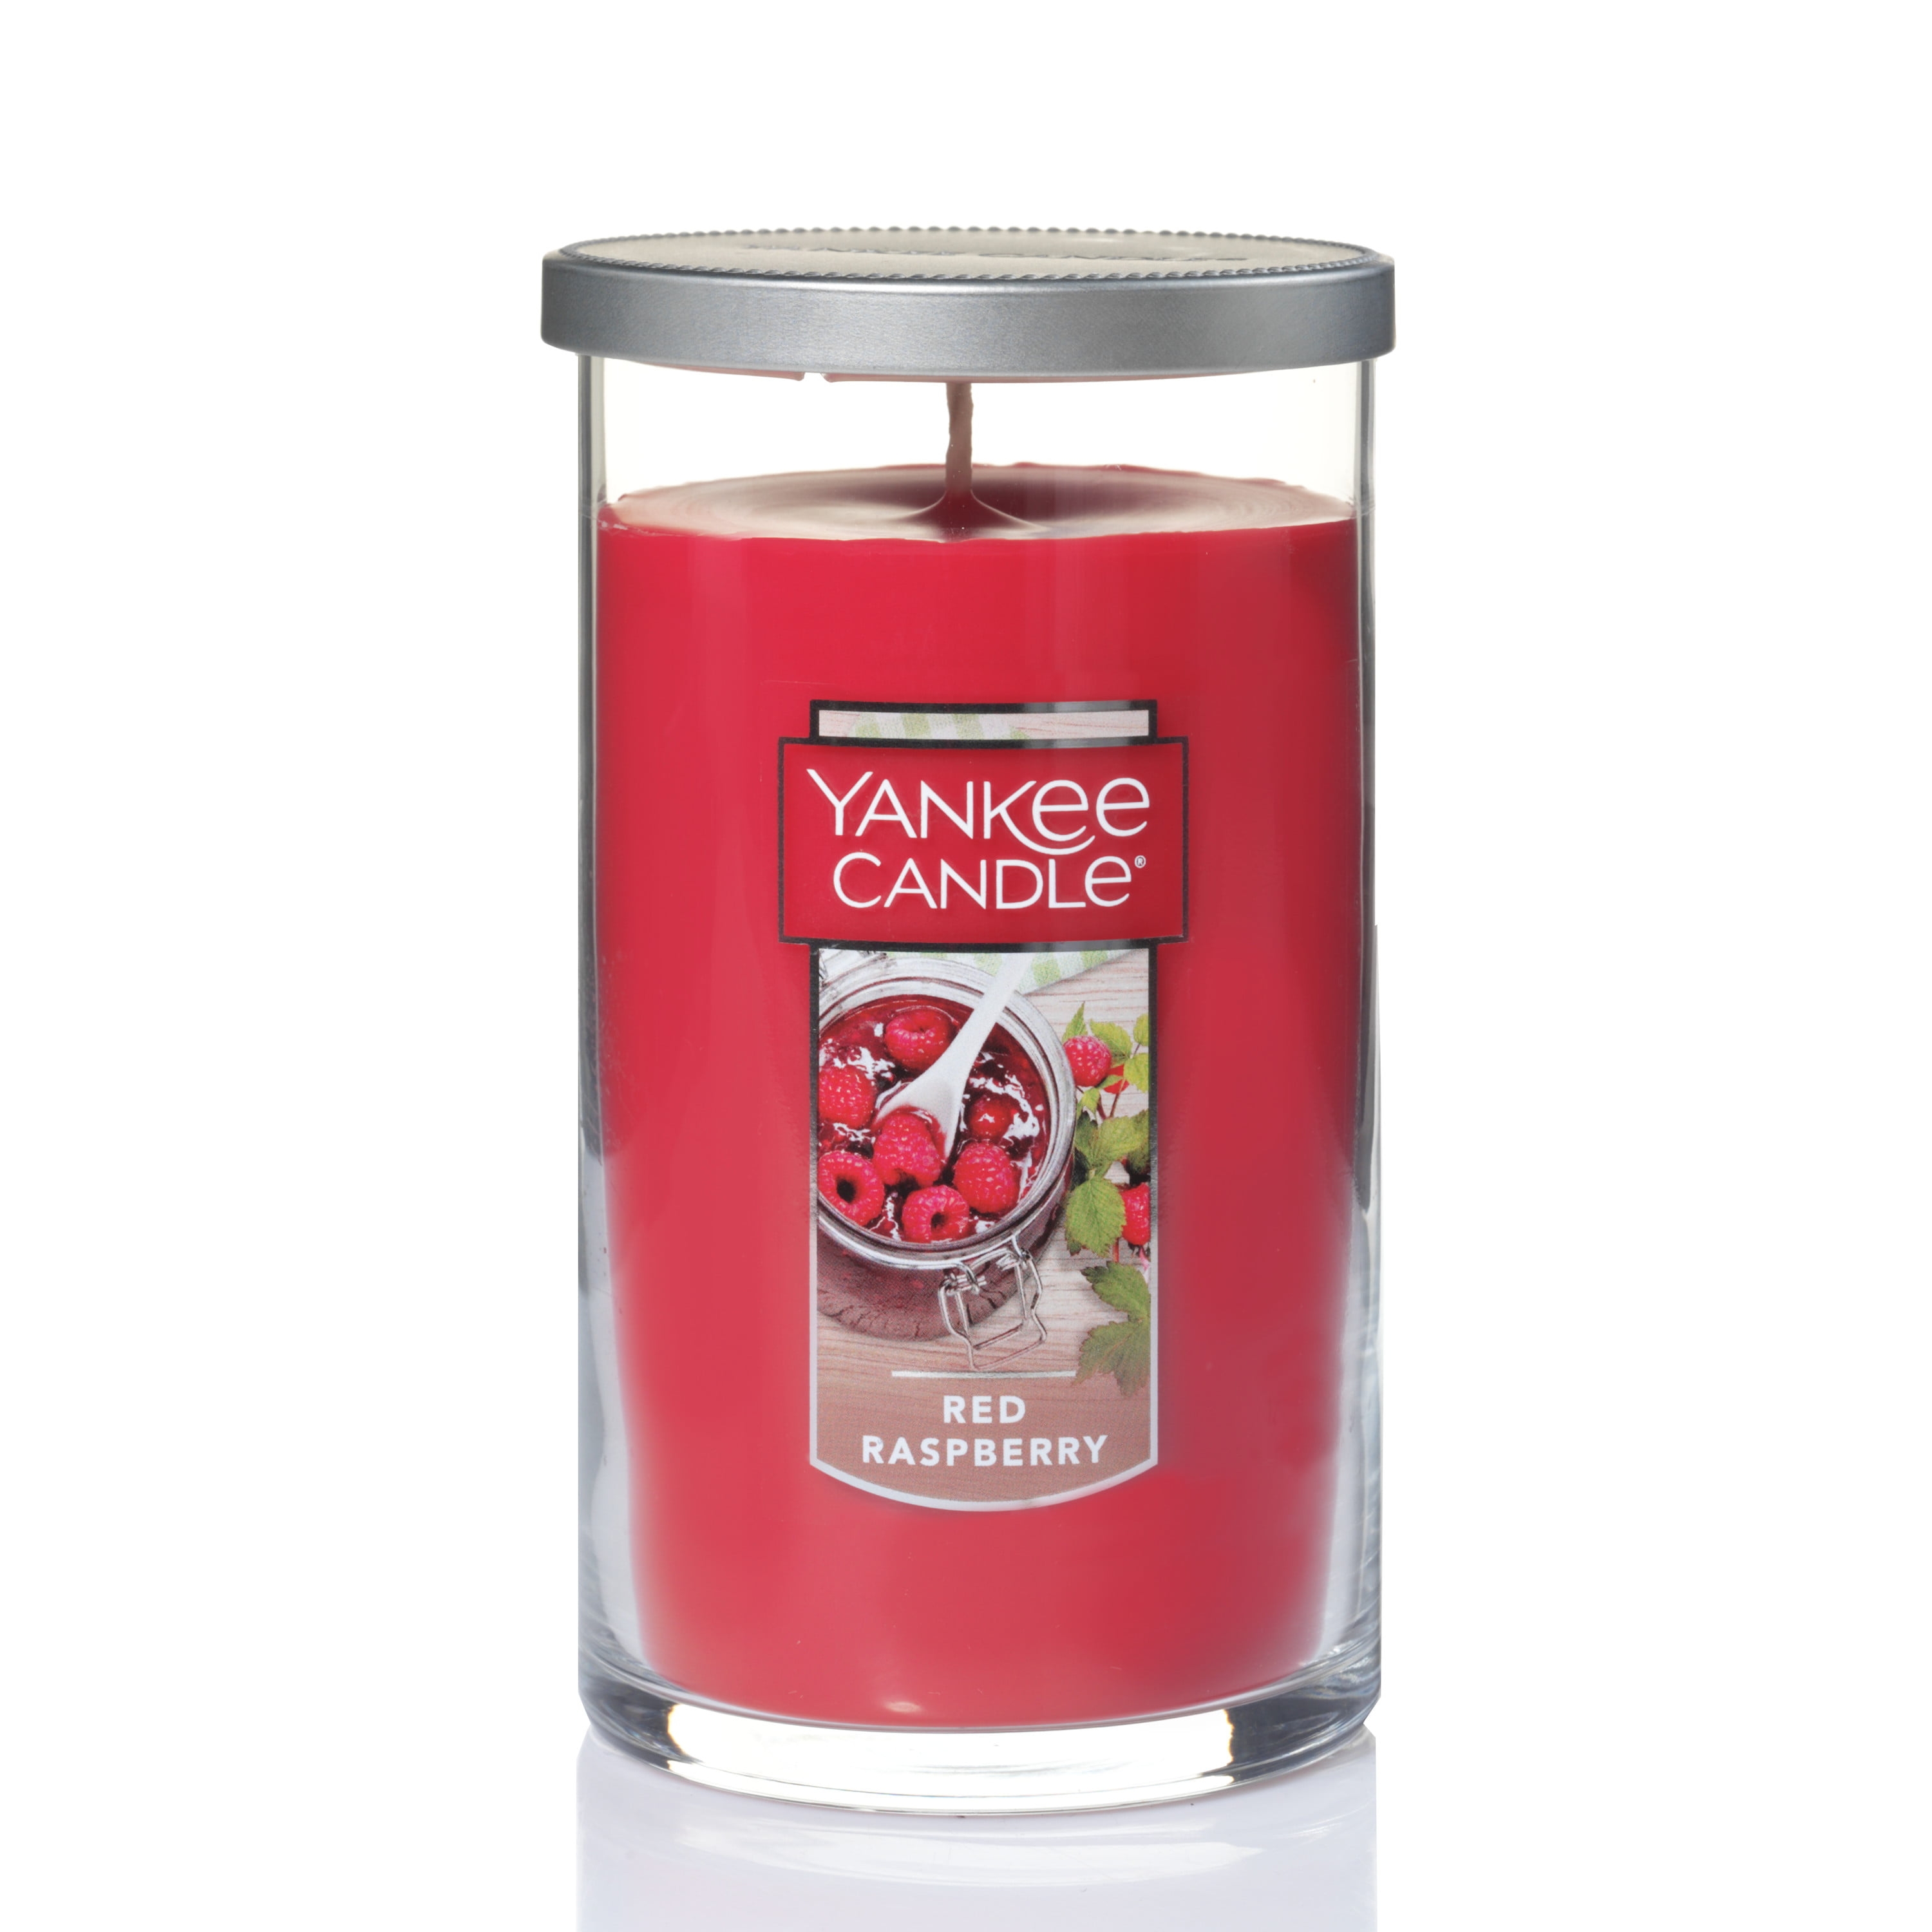 Yankee Candle Medium Perfect Pillar Scented Candle, Red Raspberry ...